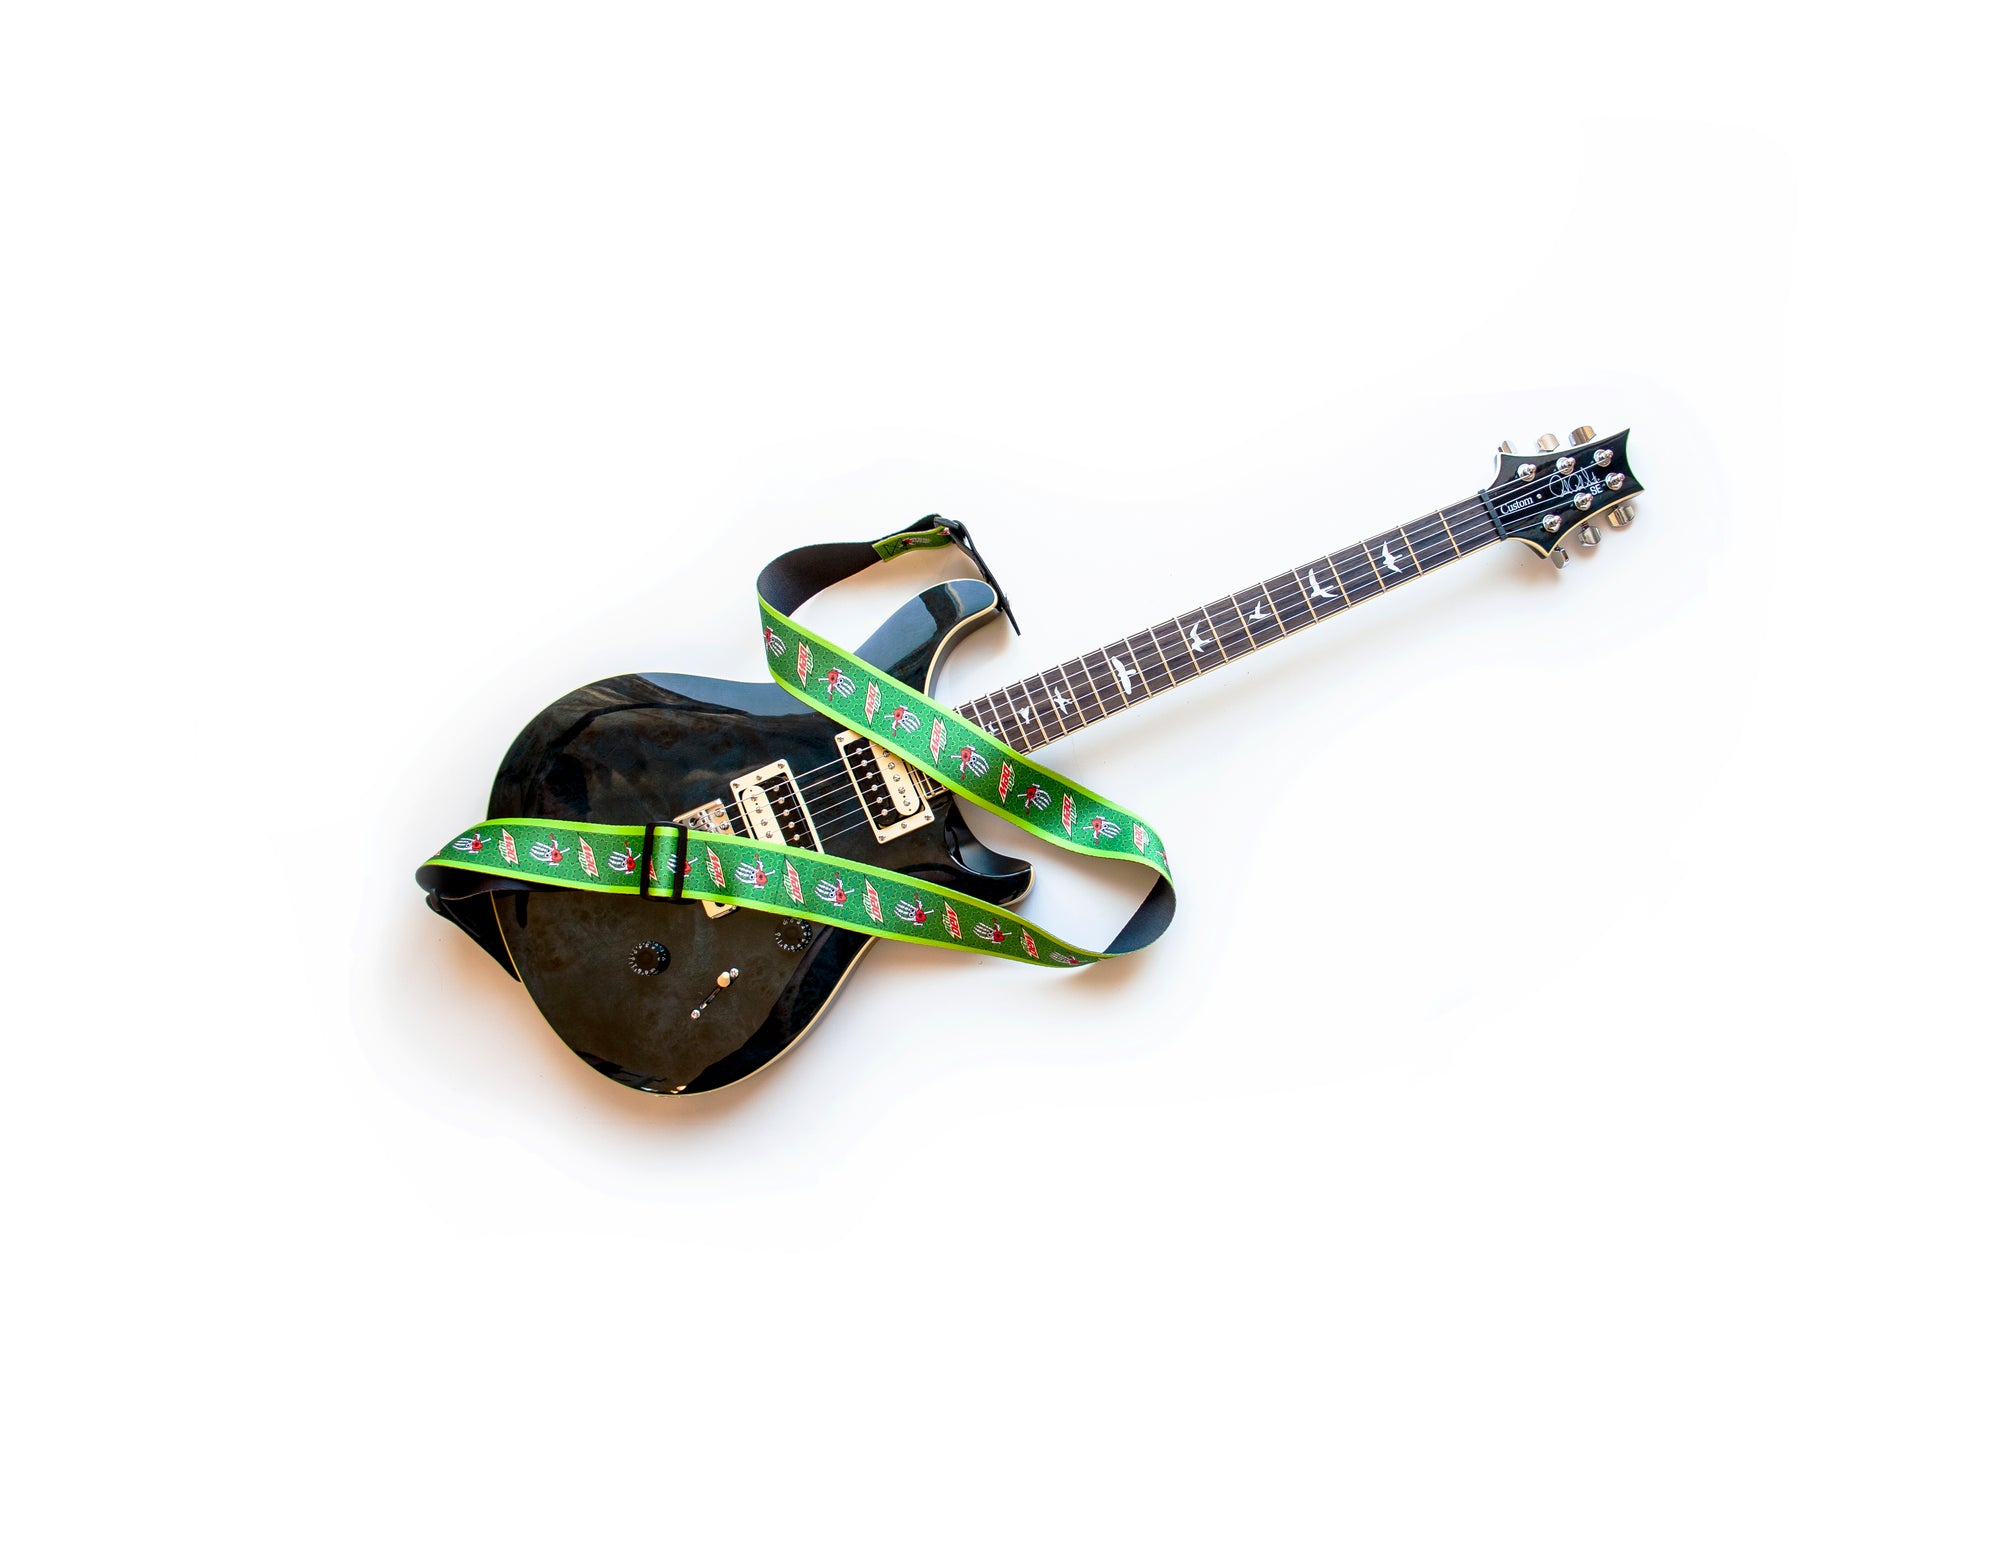 Green graphic polyester guitar strap on a guitar. 